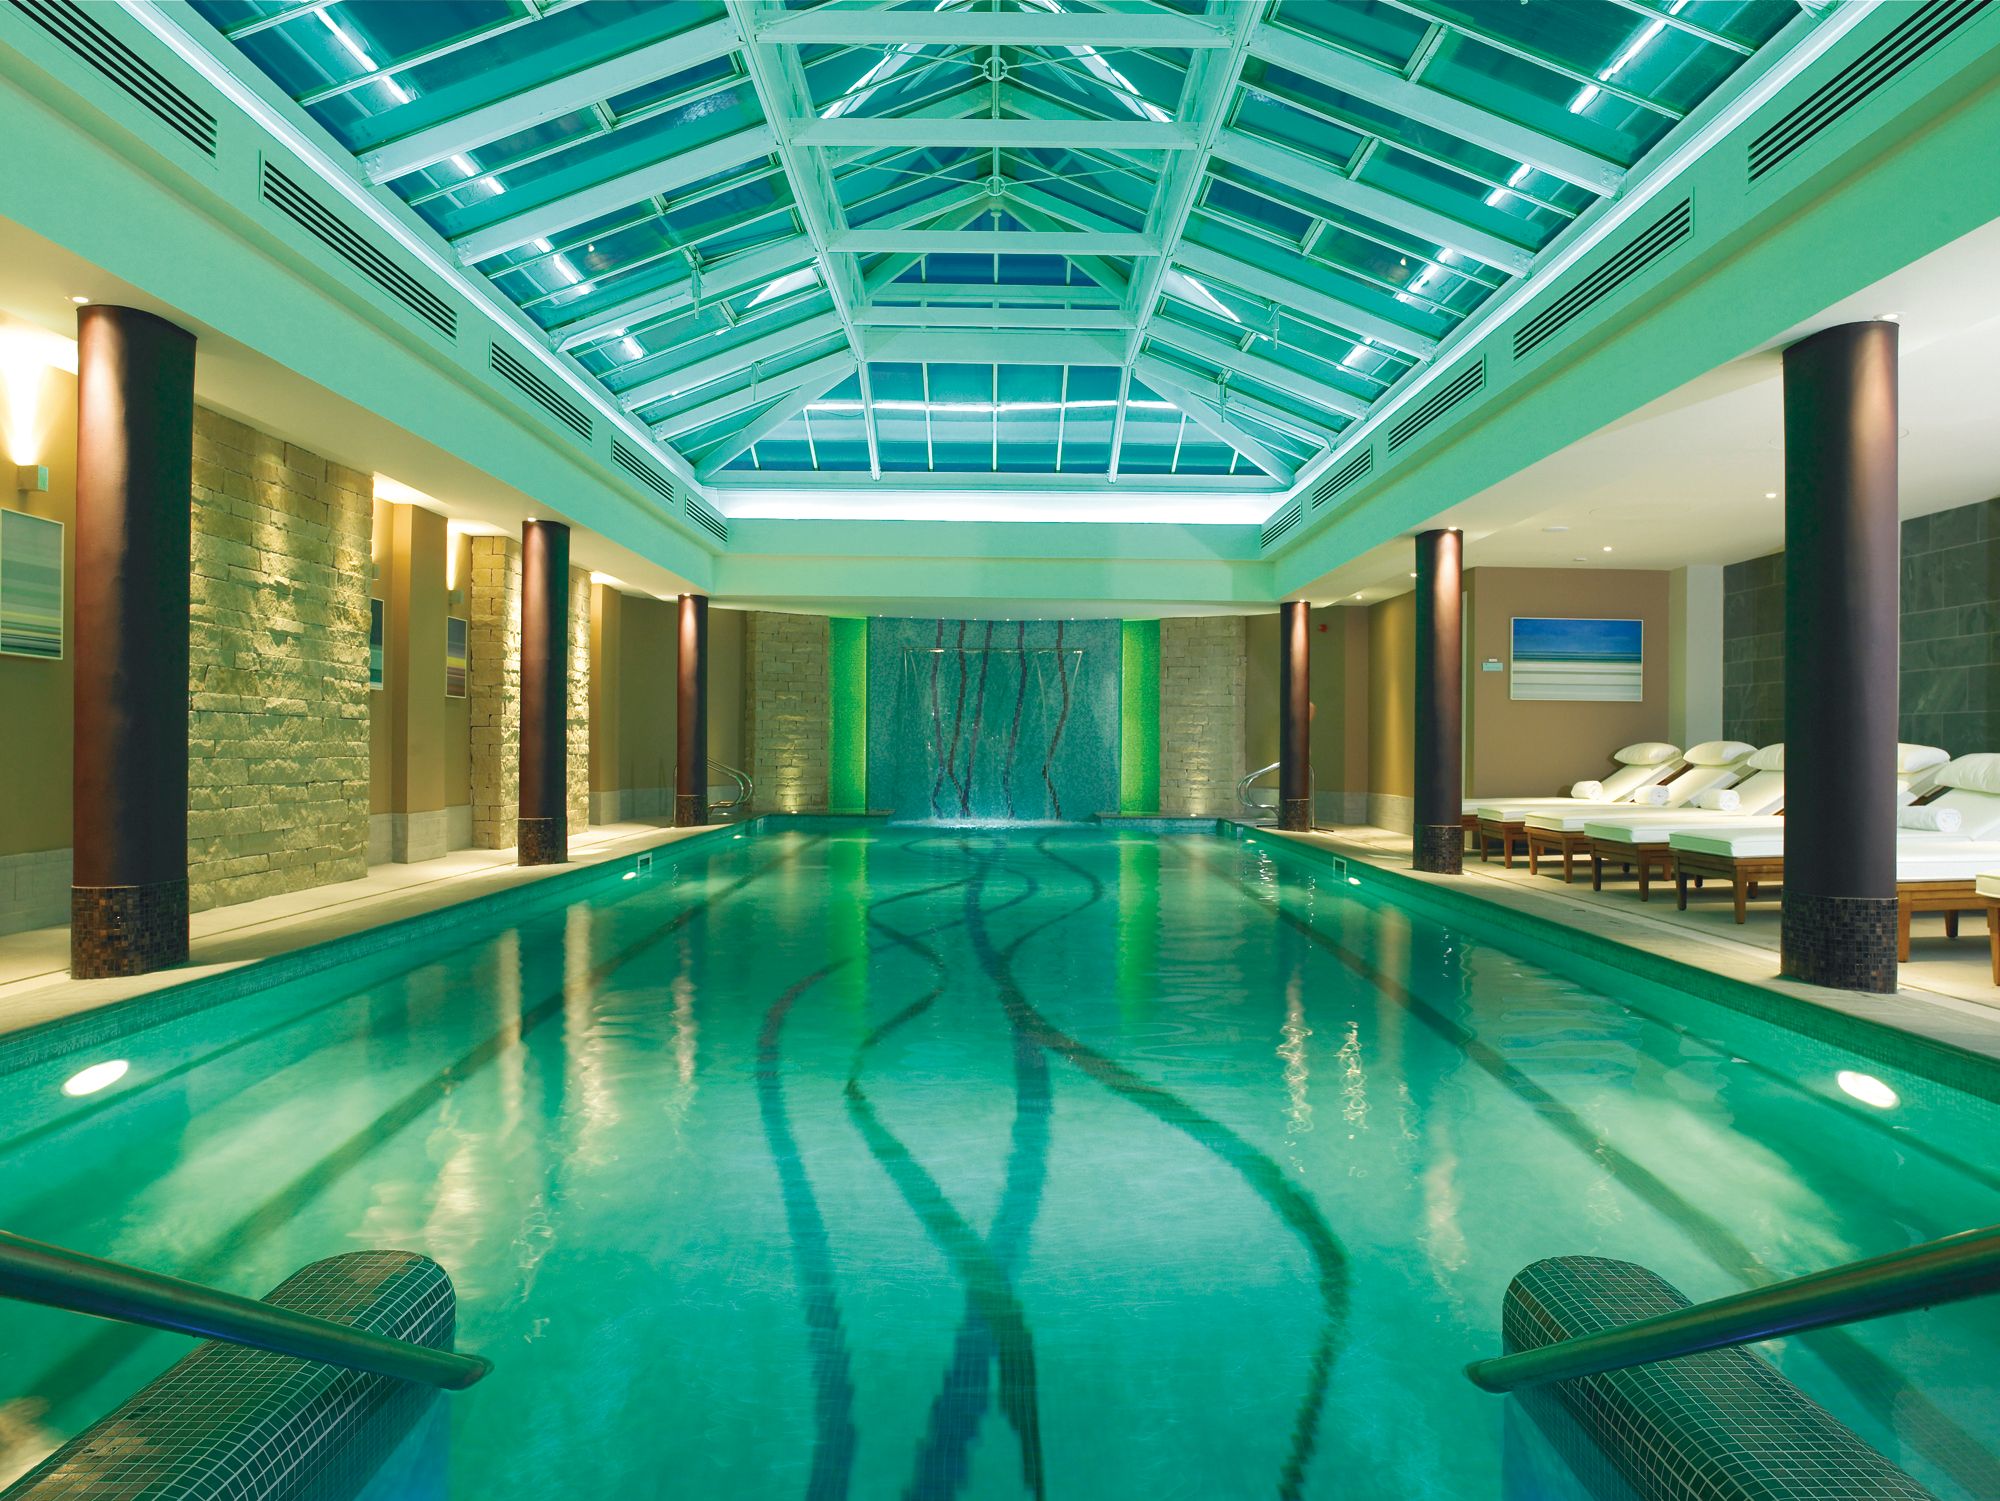 Image of Spa Pool Old Course Hotel, Golf Resort & Spa, 15th Century, Member of Historic Hotels Worldwide, in St. Andrews, Scotland, Spa